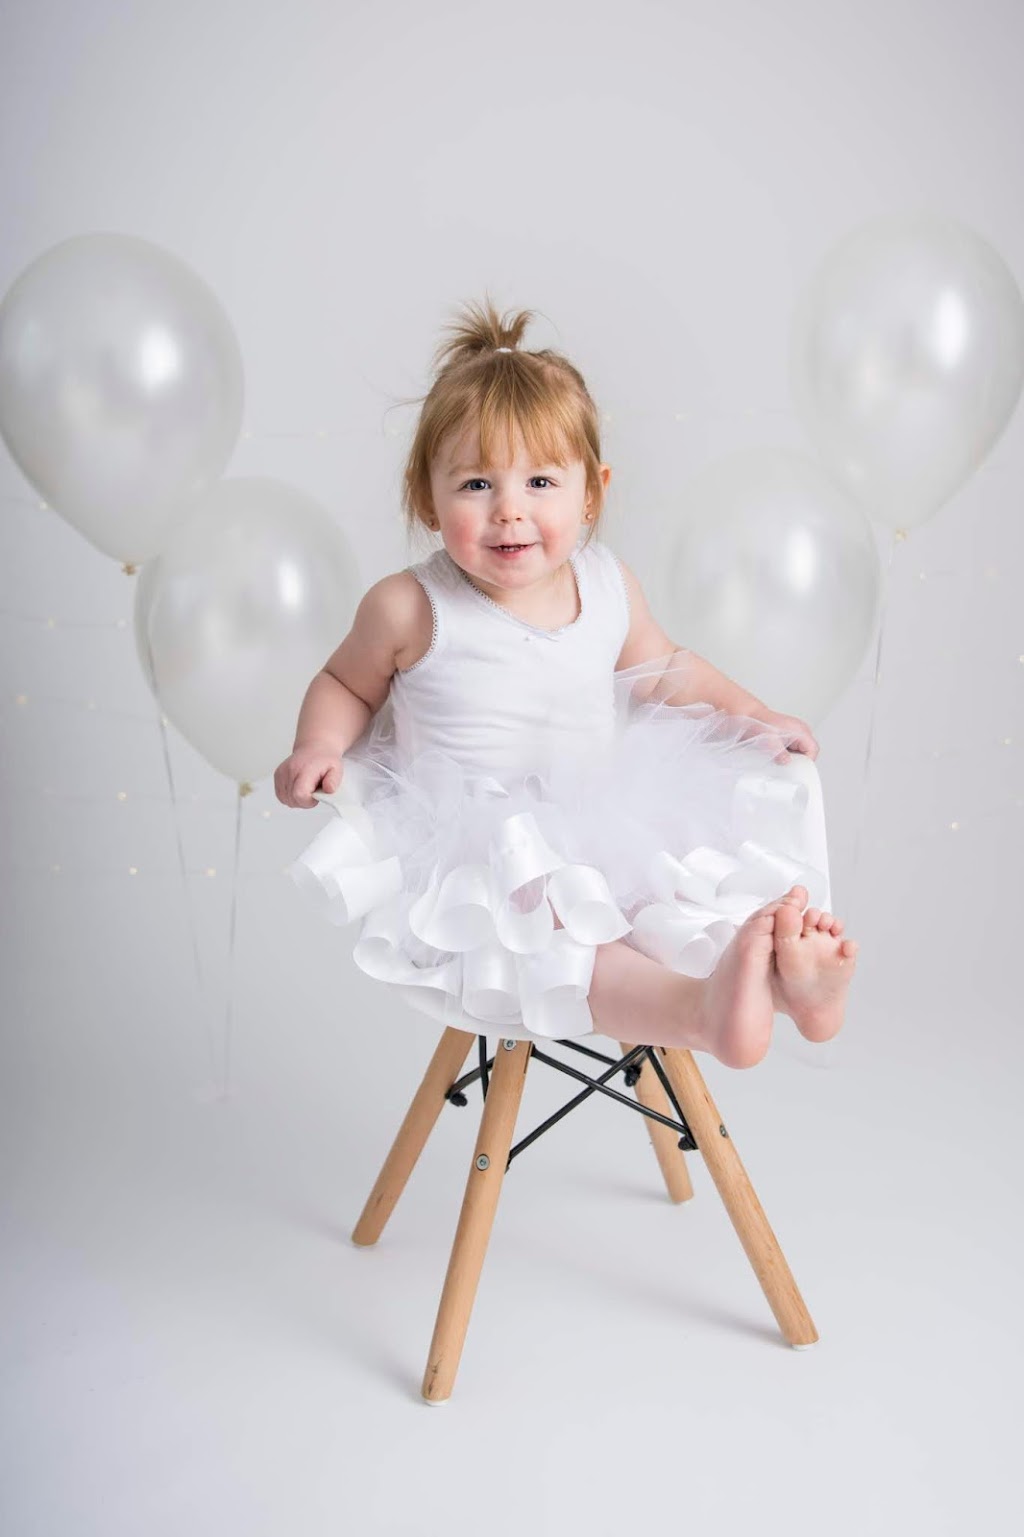 Tiffany Paradis Photography - Barrie | 149 Cardinal St, Barrie, ON L4M 6G2, Canada | Phone: (705) 791-8535